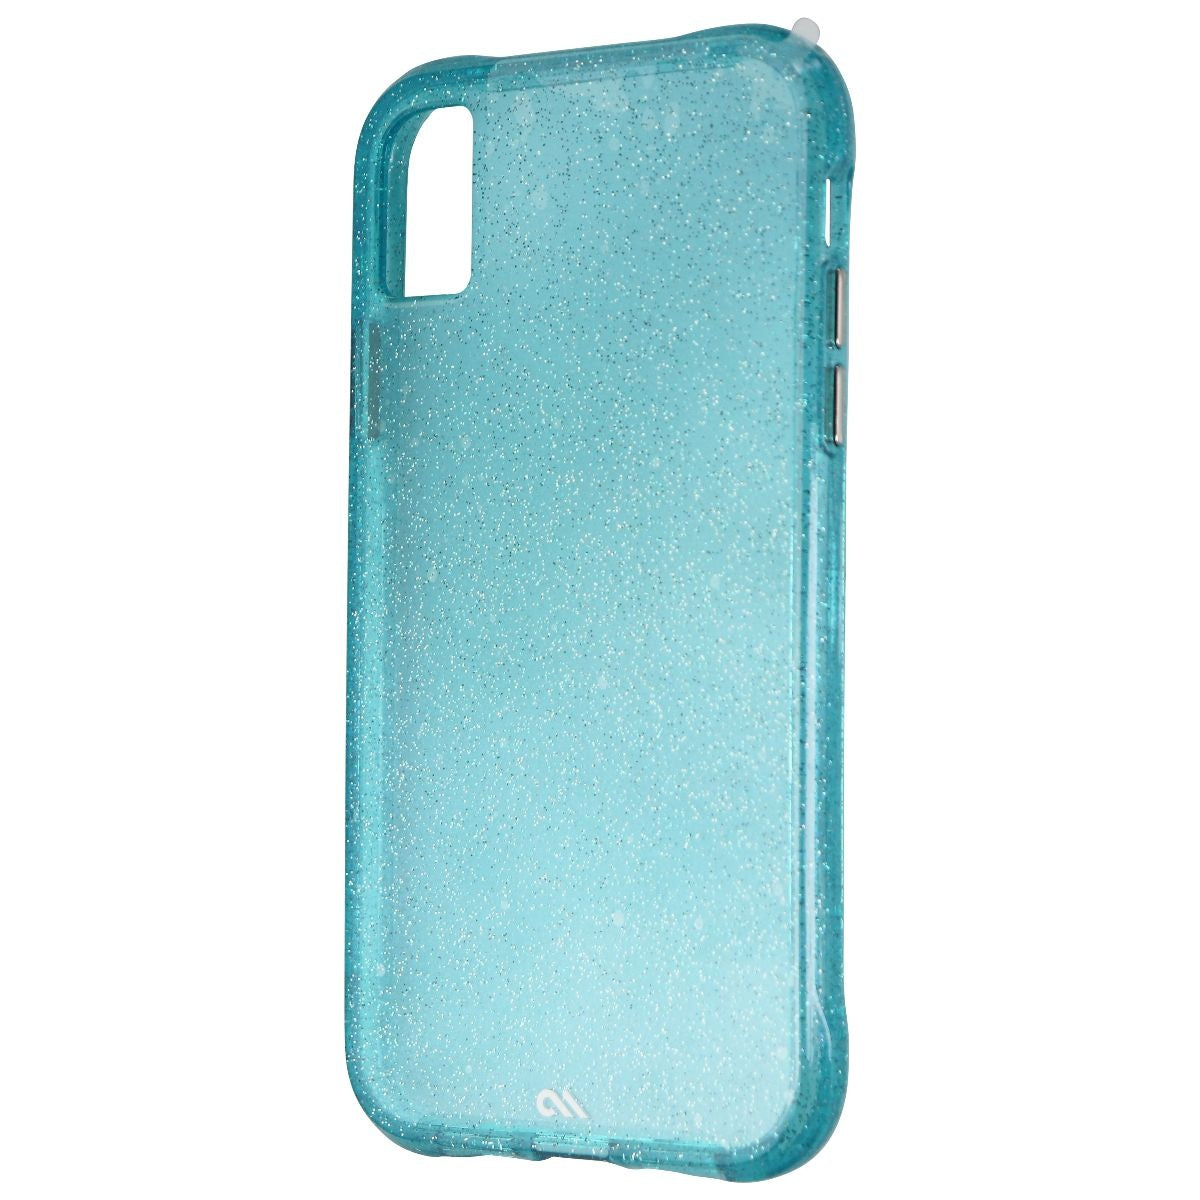 Case-Mate Sheer Crystal Case for Apple iPhone XR - Crystal Teal